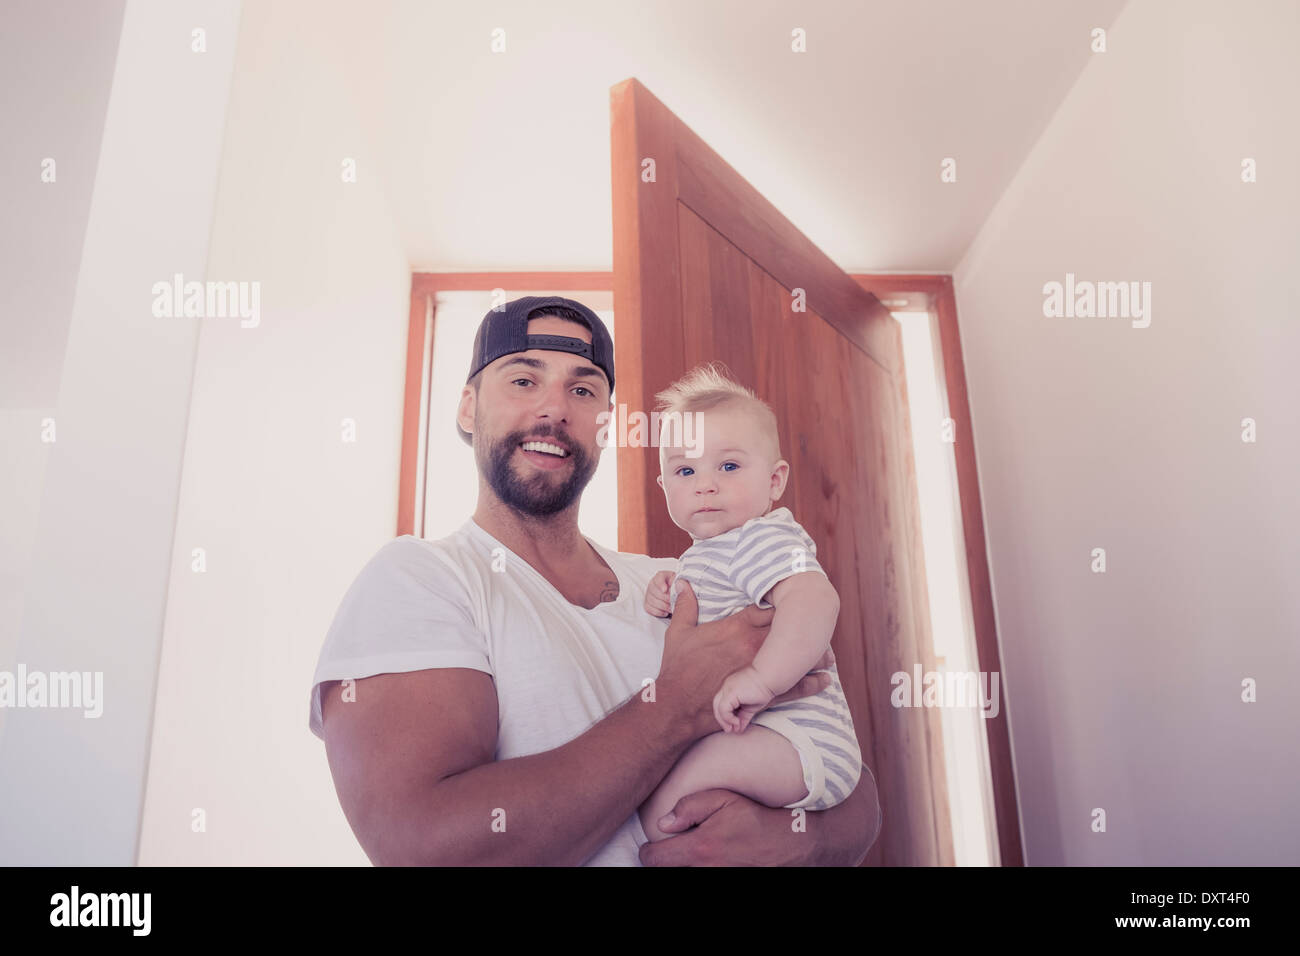 Portrait of smiling father holding baby son in doorway Banque D'Images